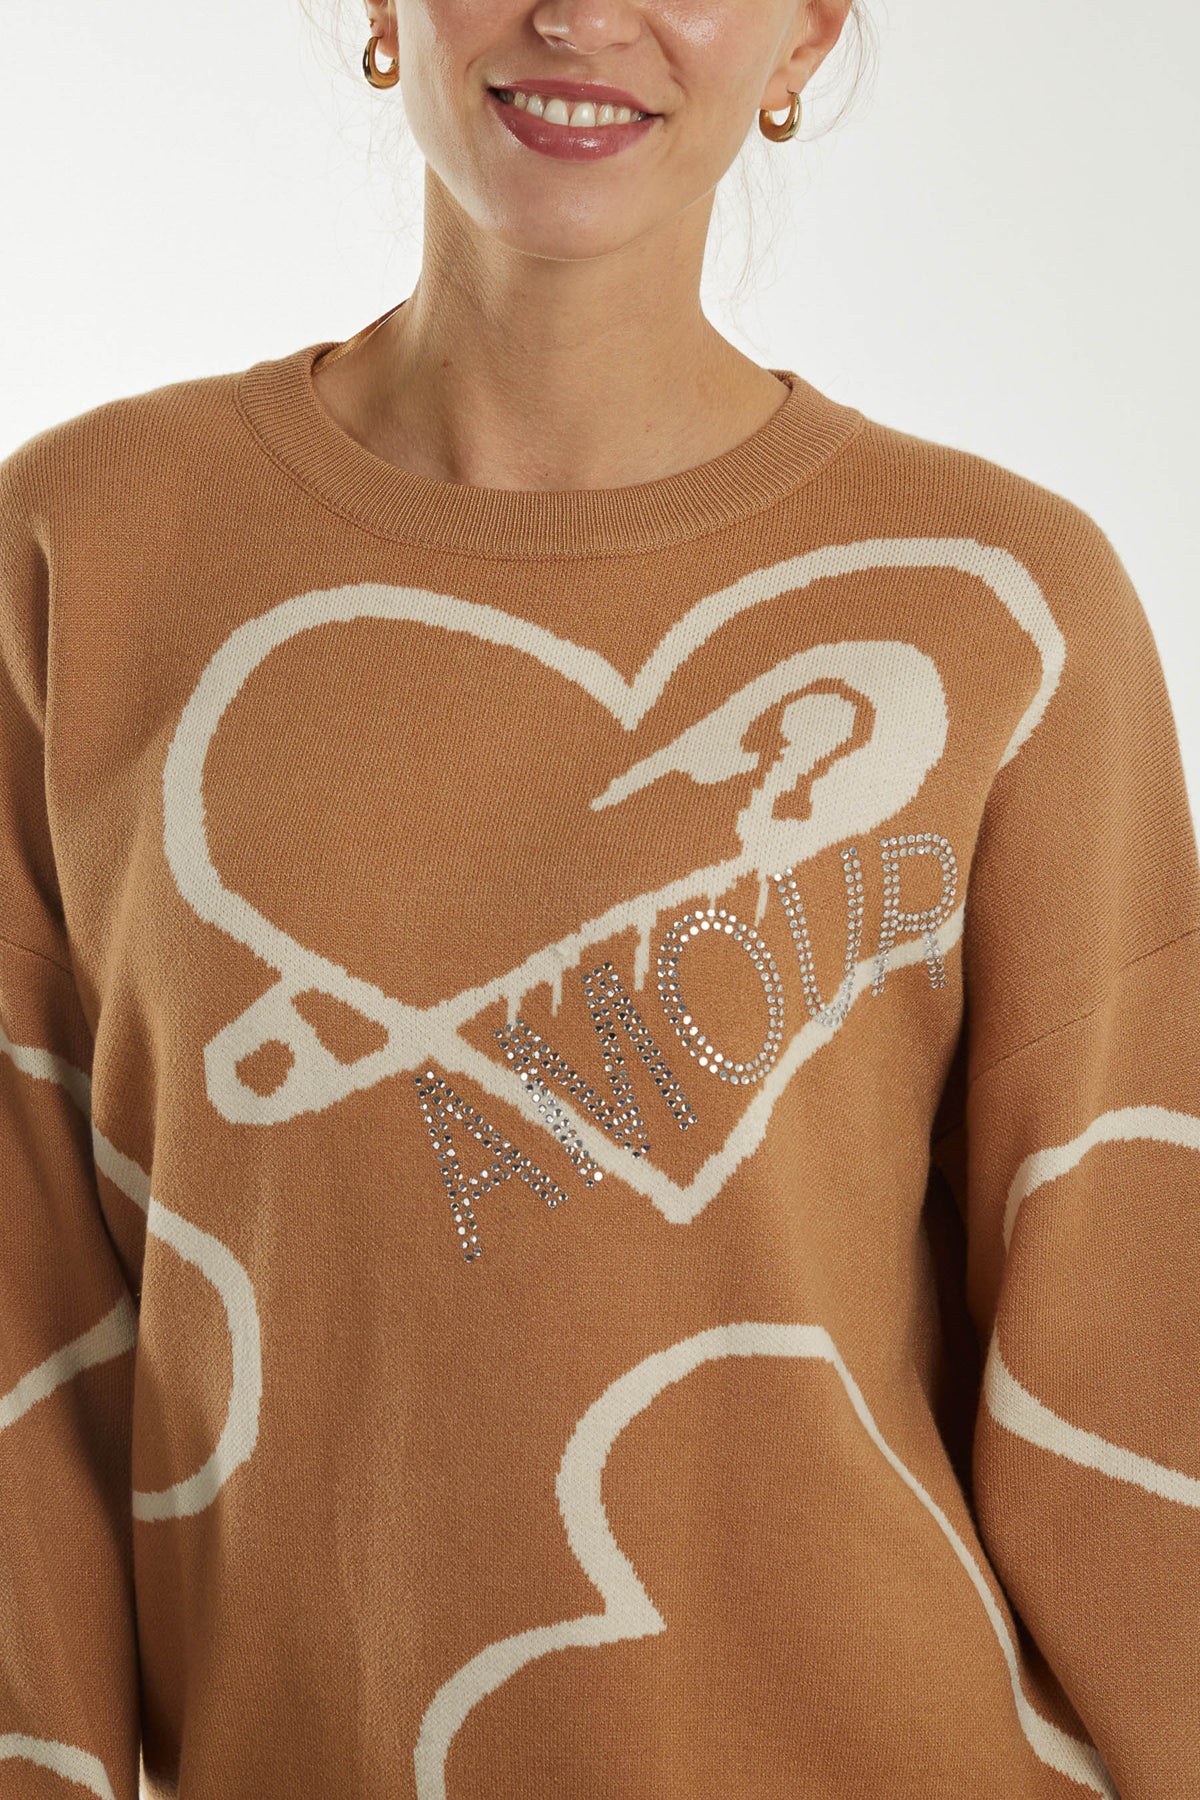 Mended Heart 'Amour' Jumper